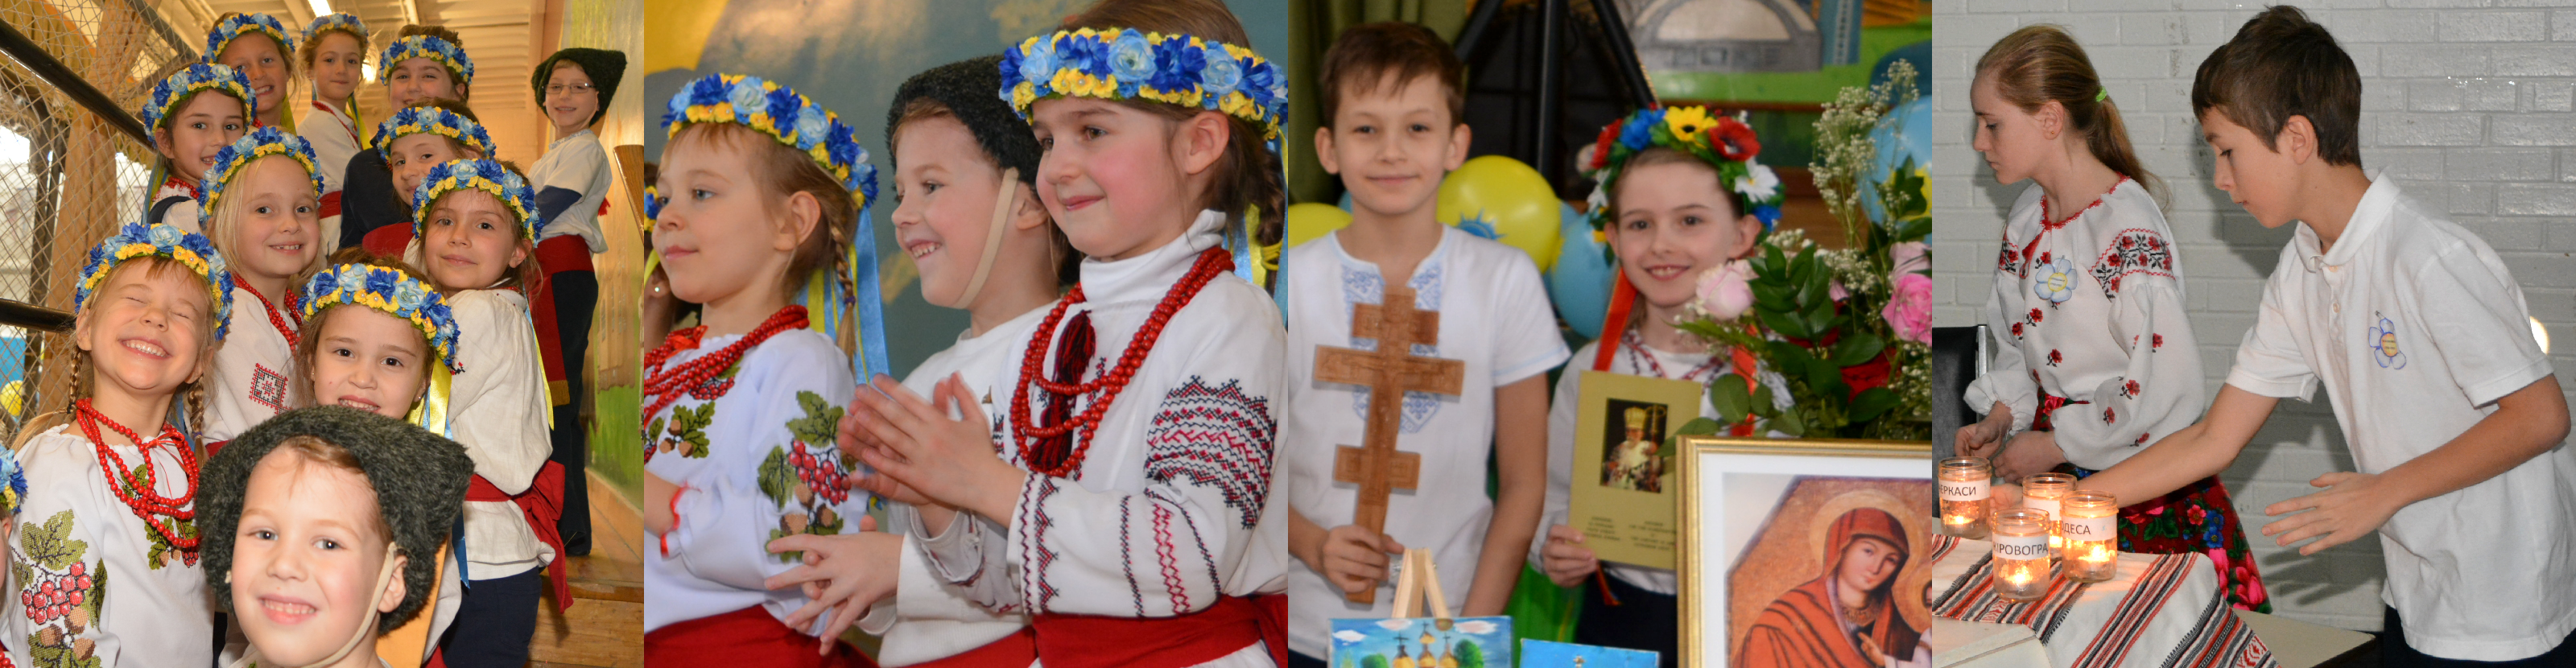 Three photos of TCDSB students in traditional Ukrainian clothing for the Patronal festival and one photo of Ukrainian students placing candles at a Holodomor Commemoration event.